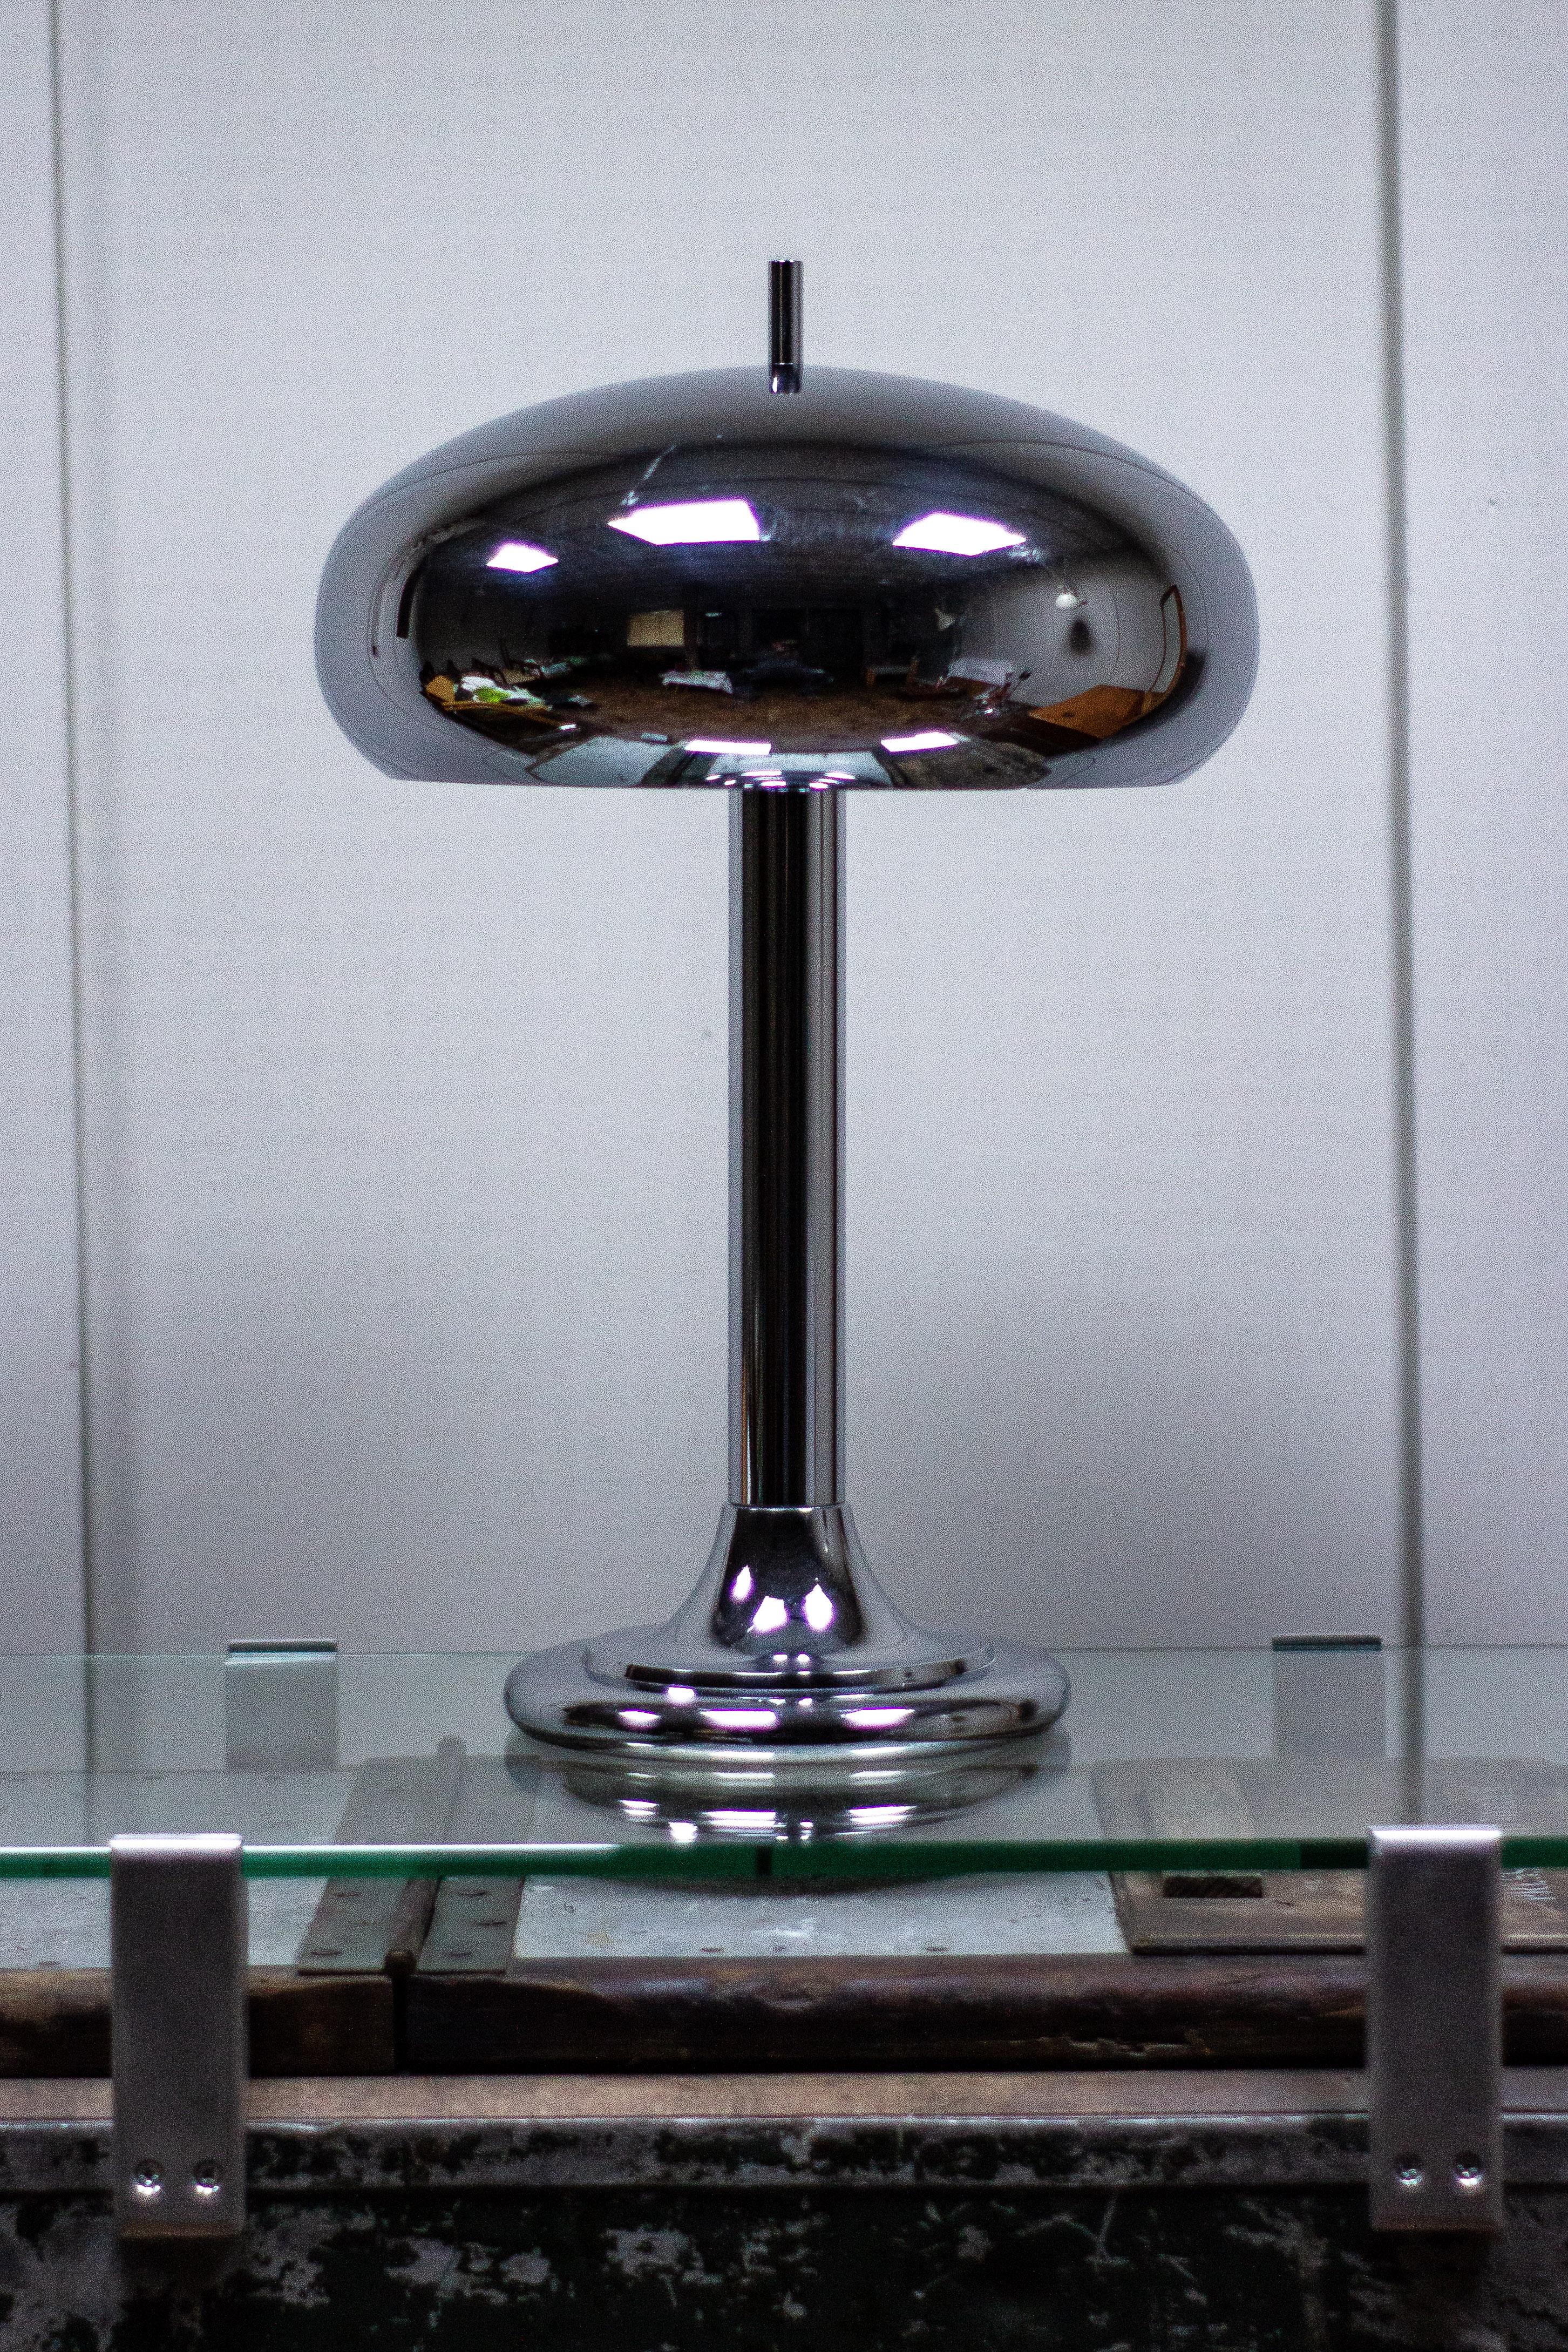 Mid-Century Modern lamp in chrome dates from the 1970s.

Maker and designer unknown. 

Measures: Height 48cm
Width 19cm
Depth 19cm.

Shade measures:
Height 15cm
Width 32cm
Depth 32cm.